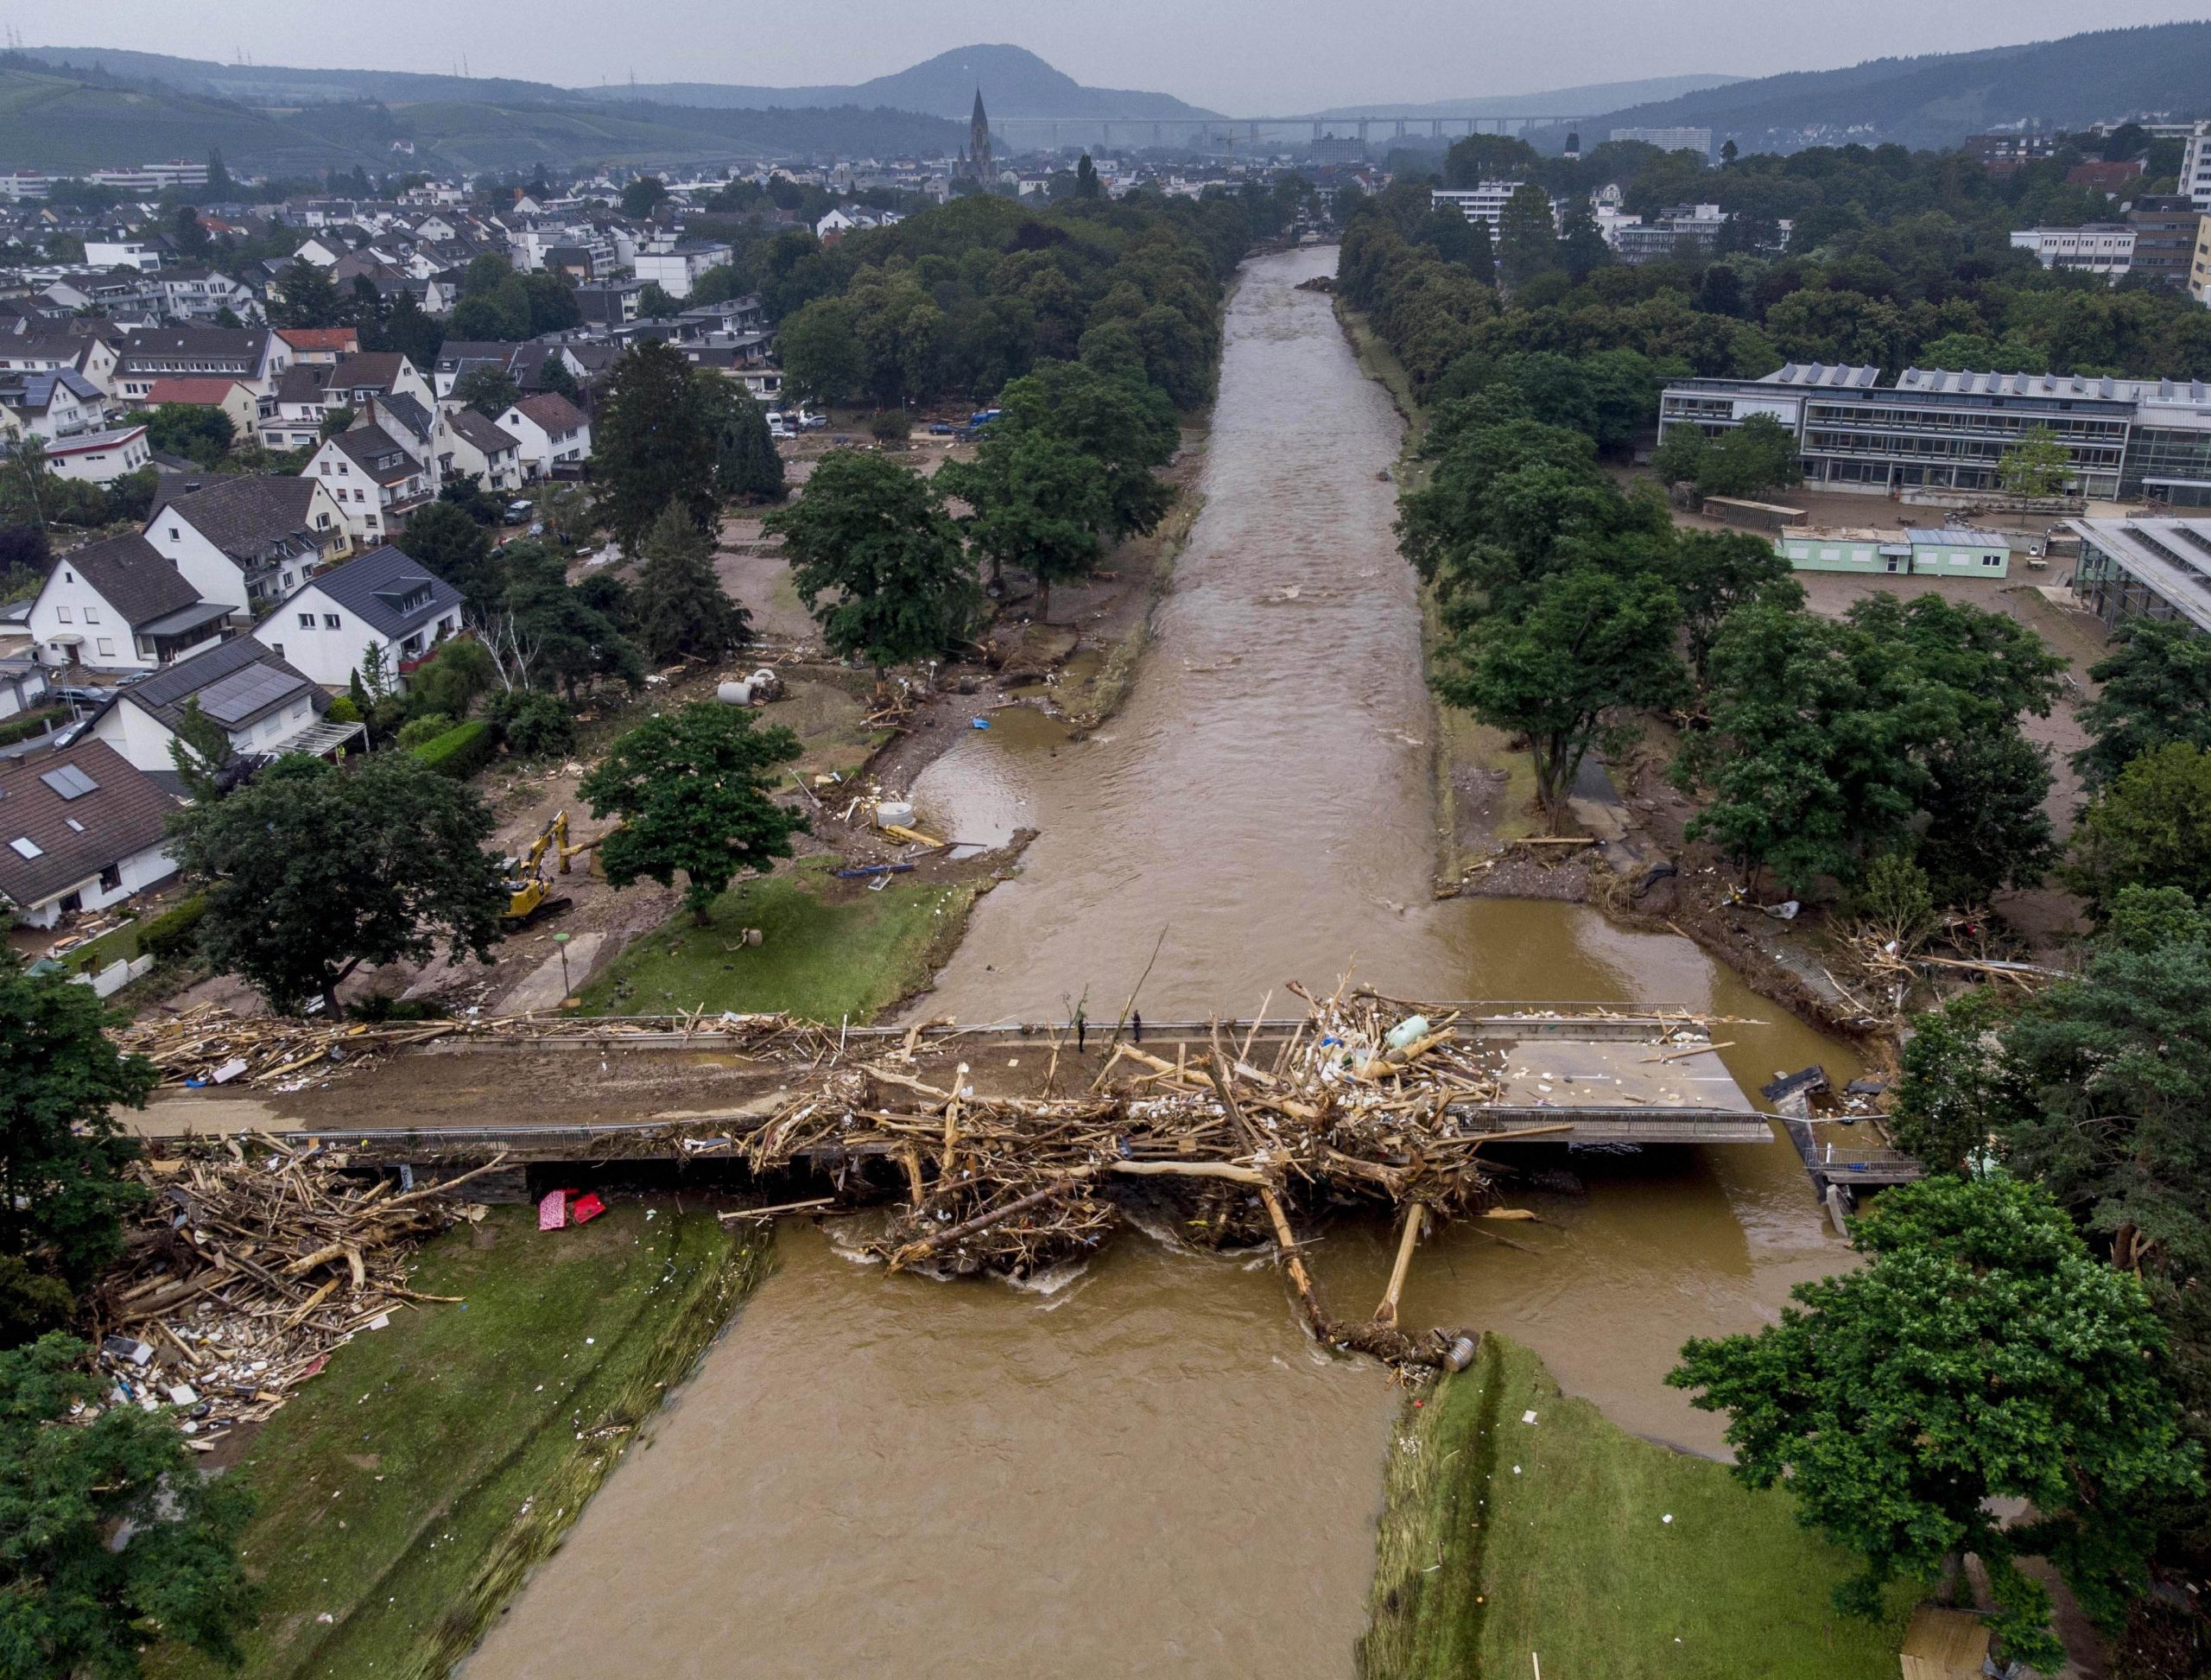 Is global warming behind the floods in Germany?